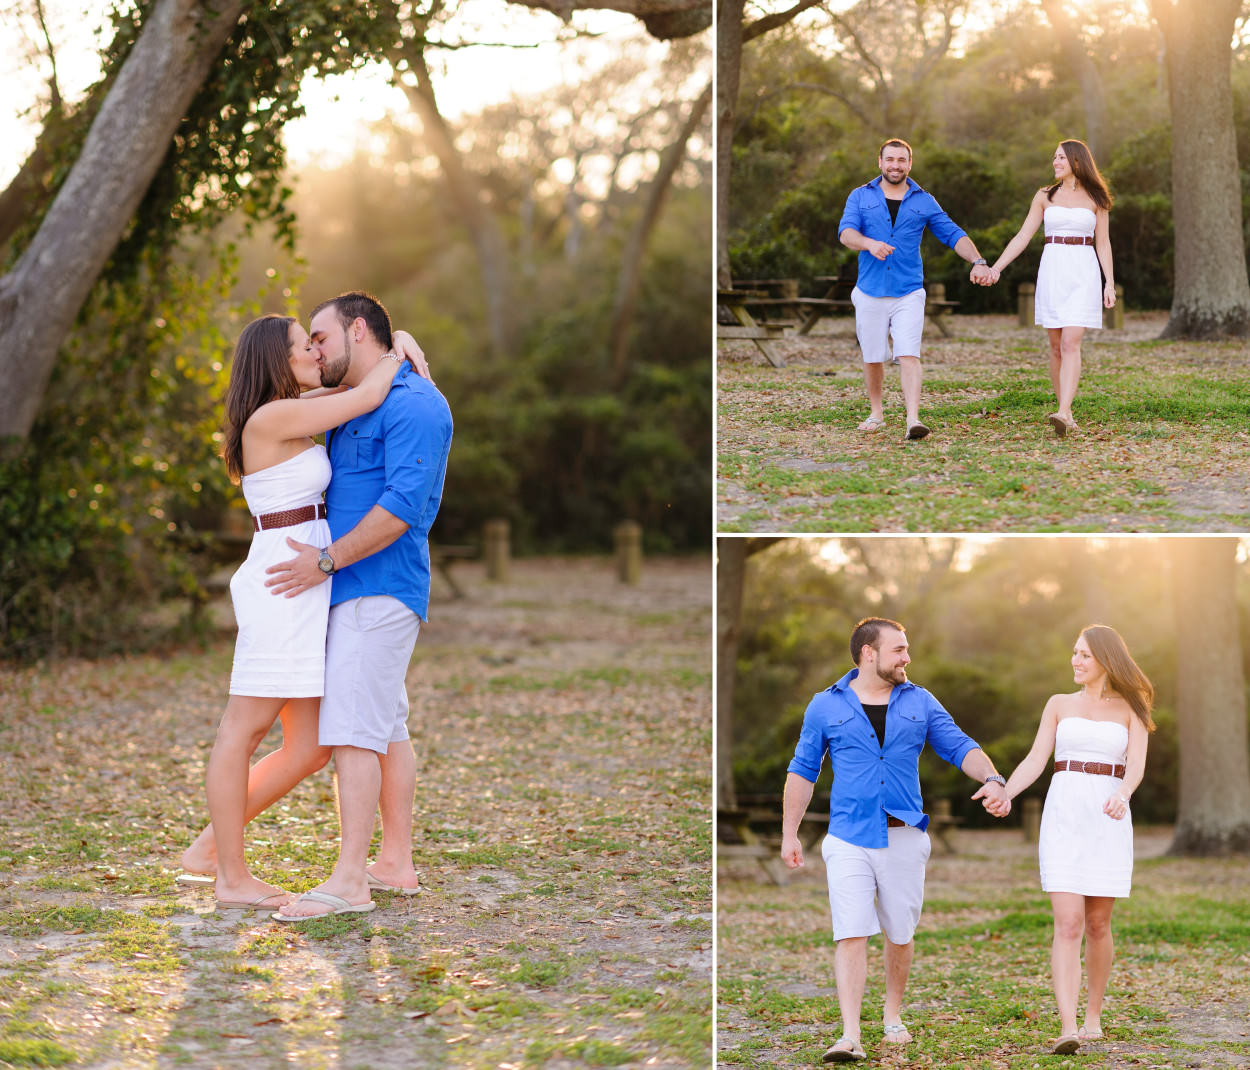 Engagement portrait backlit by rays of sunlight through the trees - Myrtle Beach